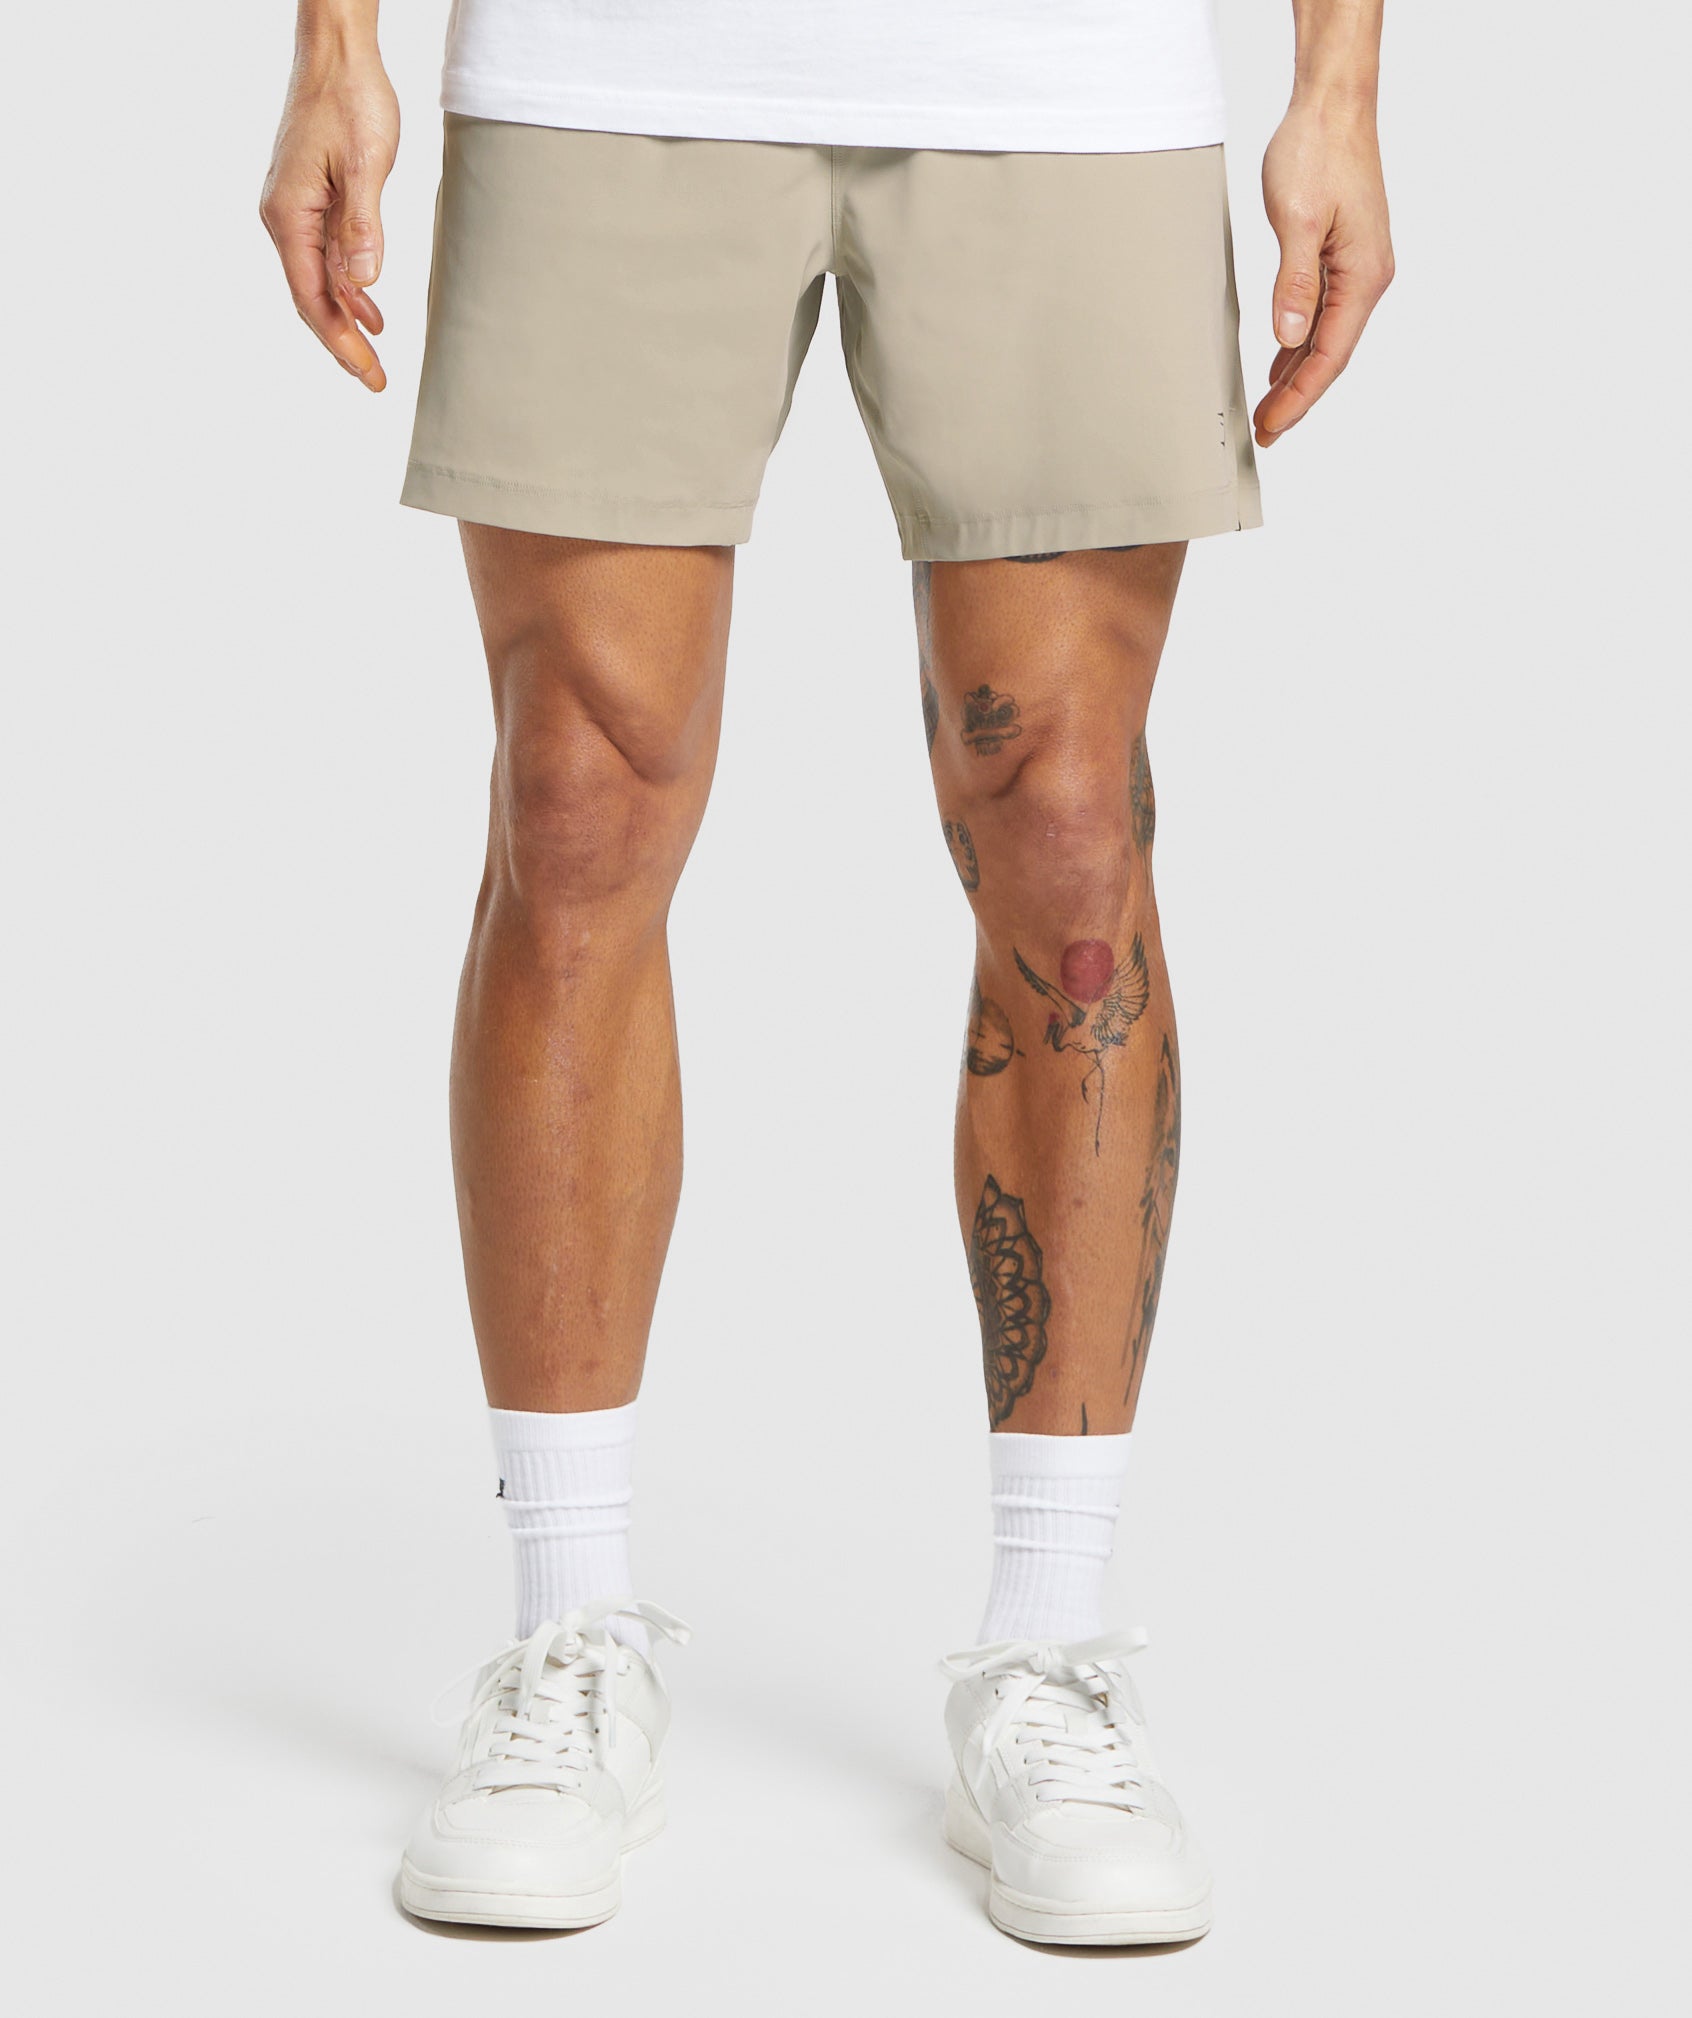 Studio 6" Shorts in Sand Brown is out of stock